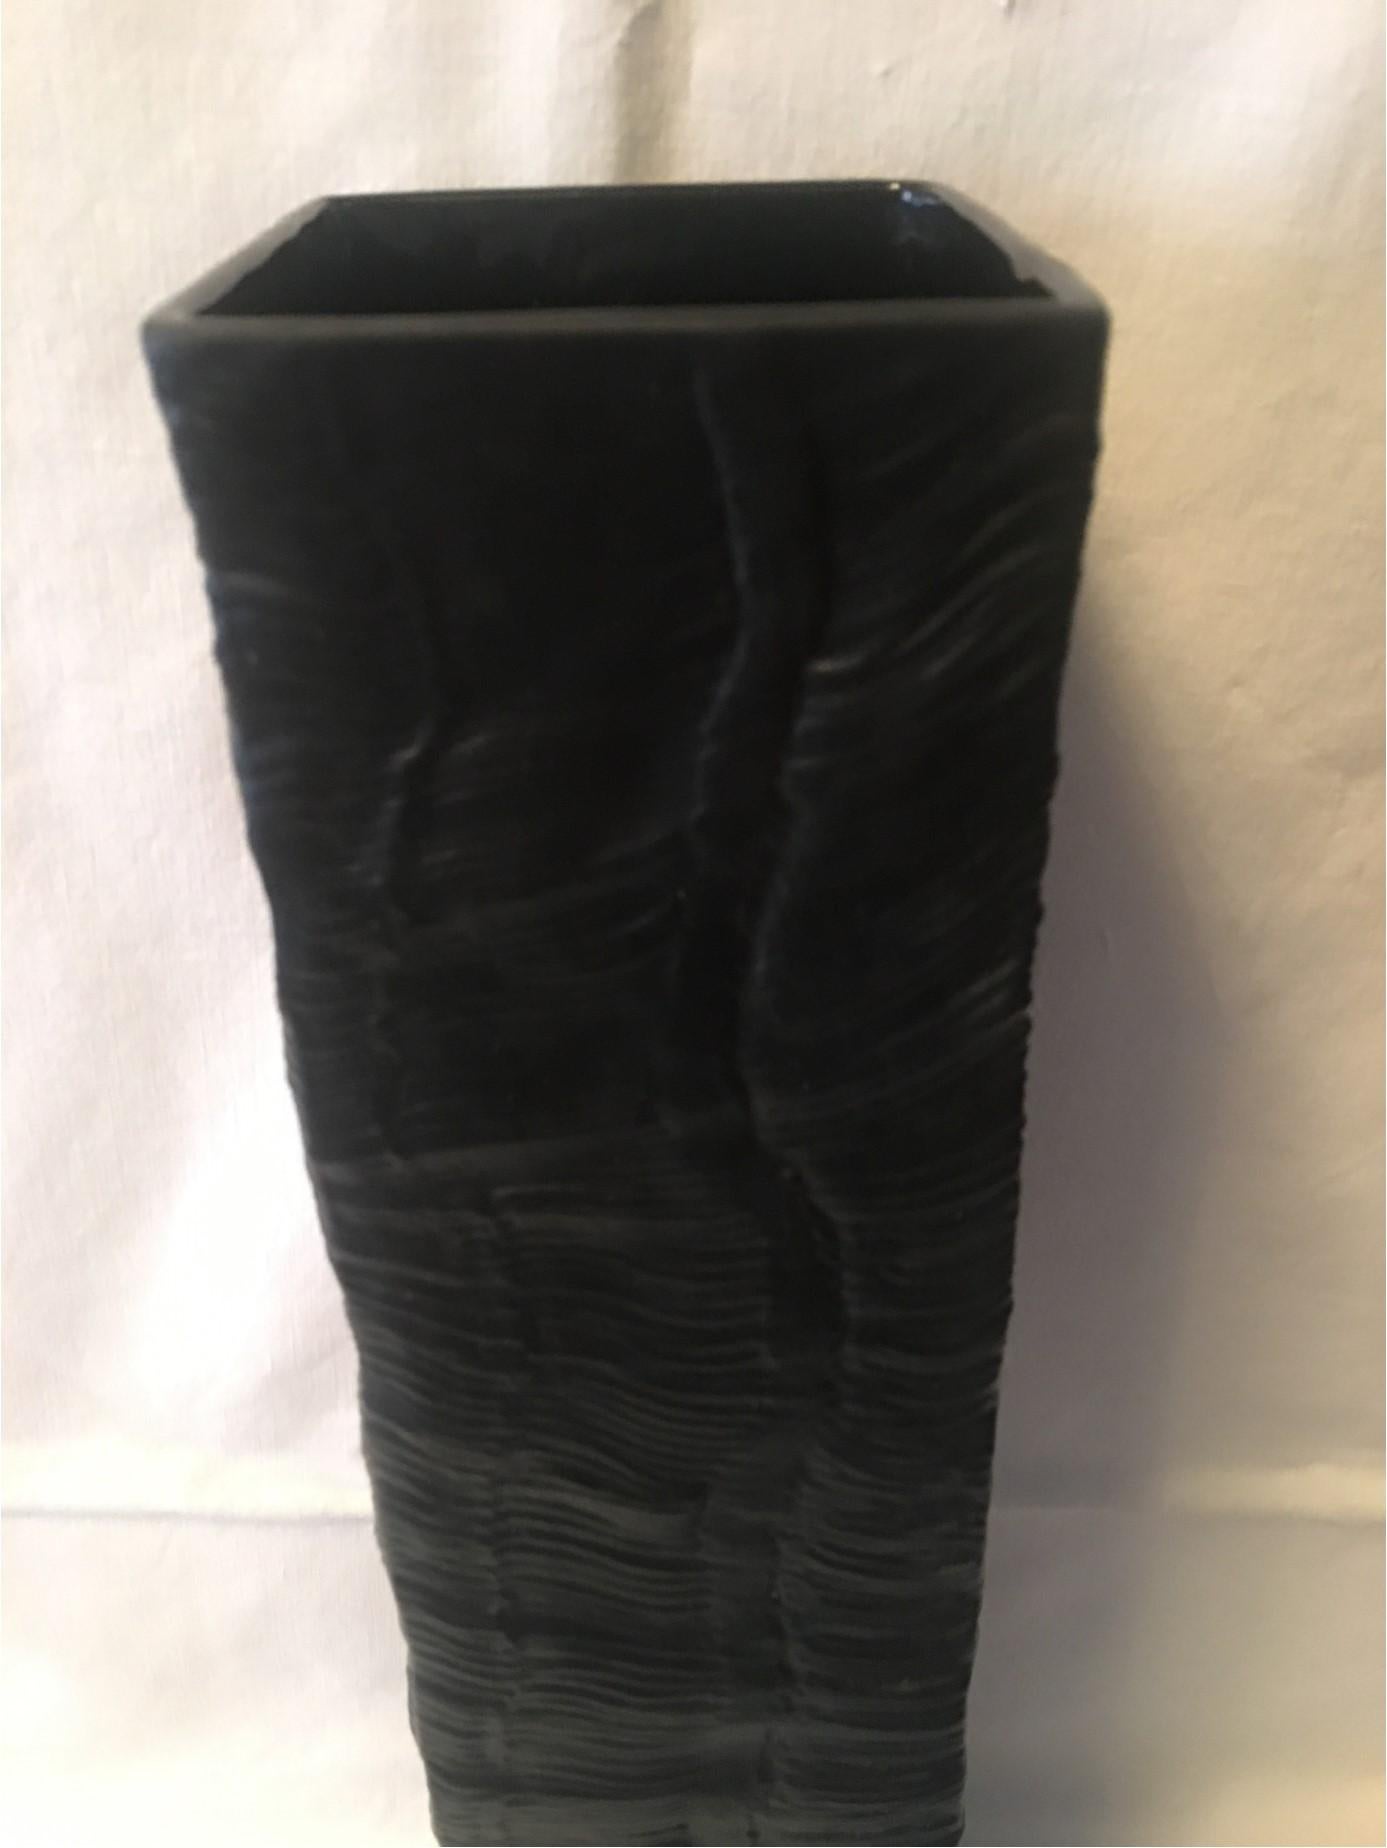 A very nice large black Vase from the Rosenthal Studio Line by Hans Martin Freyer. As designer of classy vases Freyer worked from 1954 to 1974 for Rosenthal. Lovely addition to any setting.